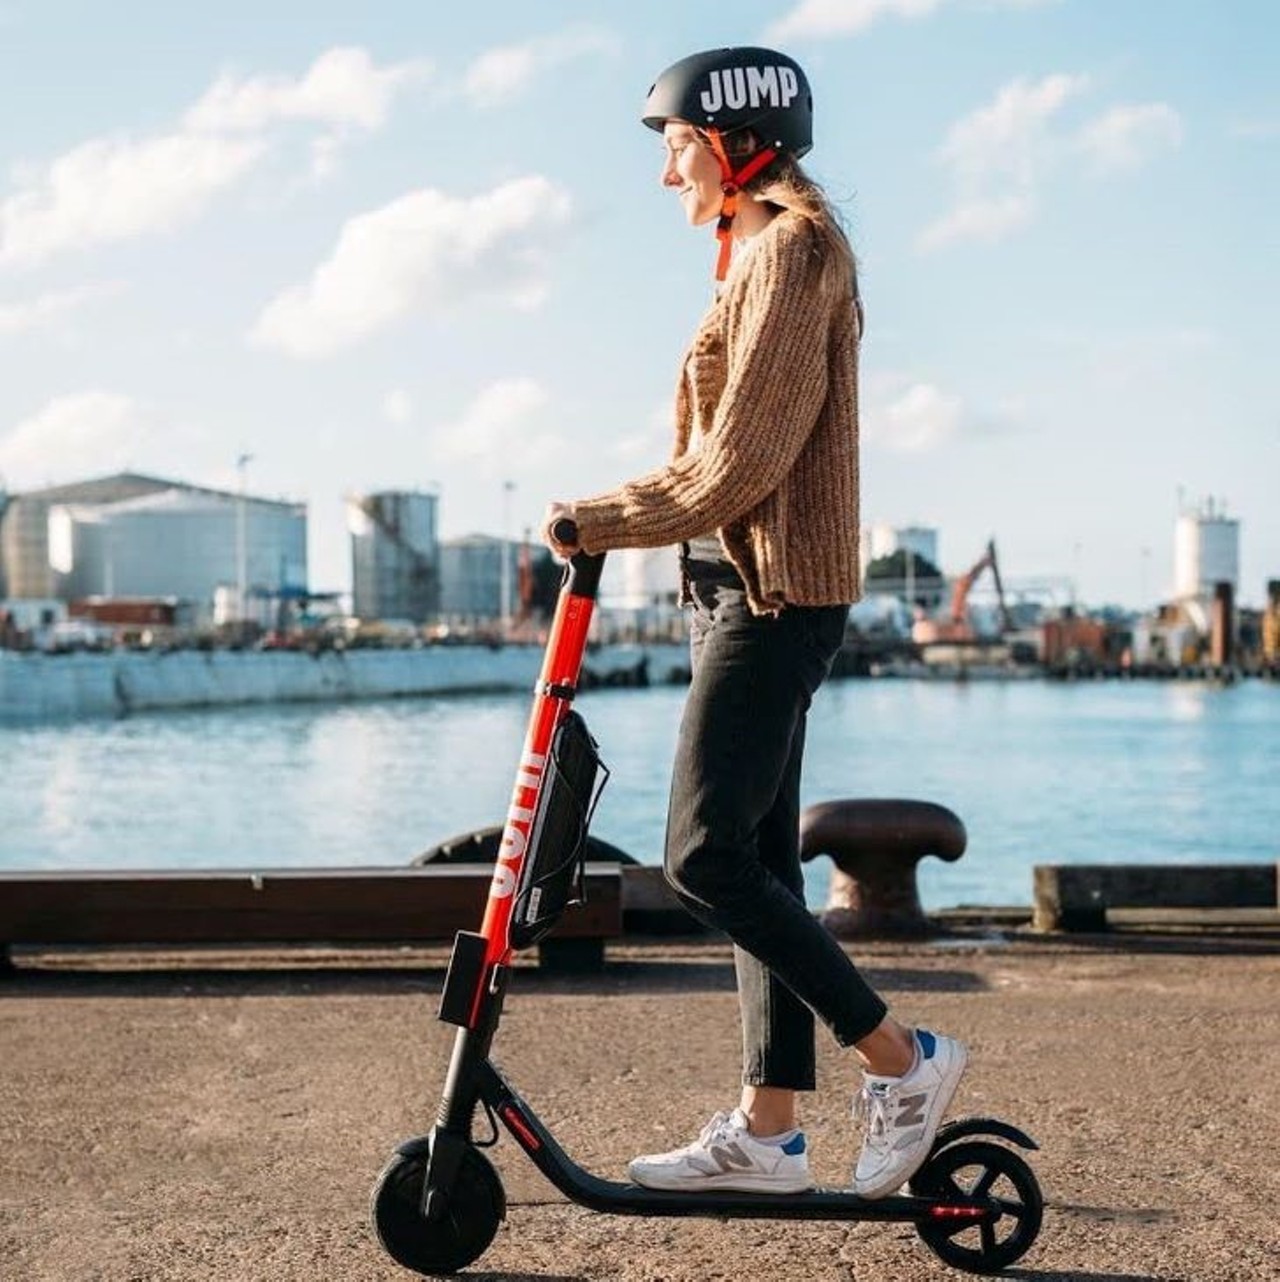 Everyone being irrationally mad at e-scooters
For a while, there wasn&#146;t a day that passed where someone wasn&#146;t complaining about e-scooters, there&#146;s just something about an electric skateboard with handles that drives people nuts. Now, we honestly kind of miss that irrational yelling. 
Photo via JUMP/Facebook